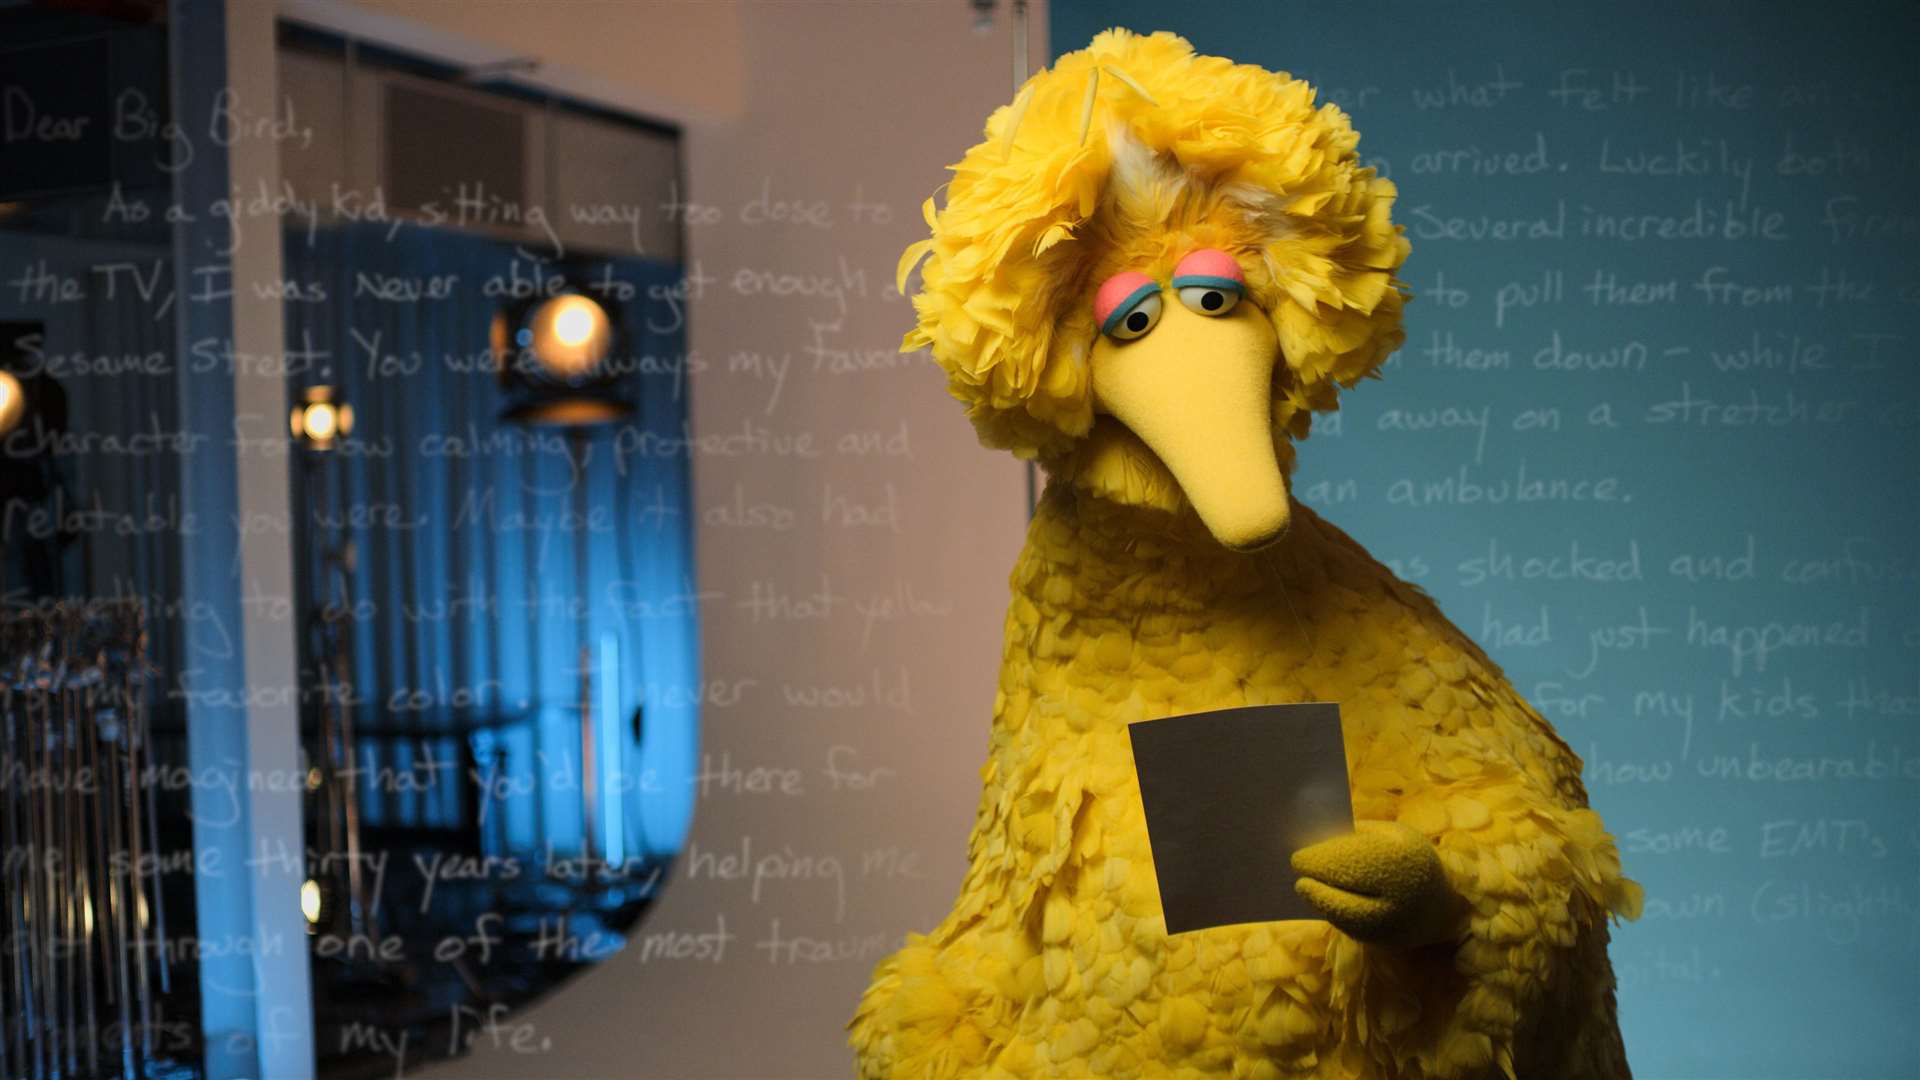 Big Bird will be making an appearance Picture: Apple TV